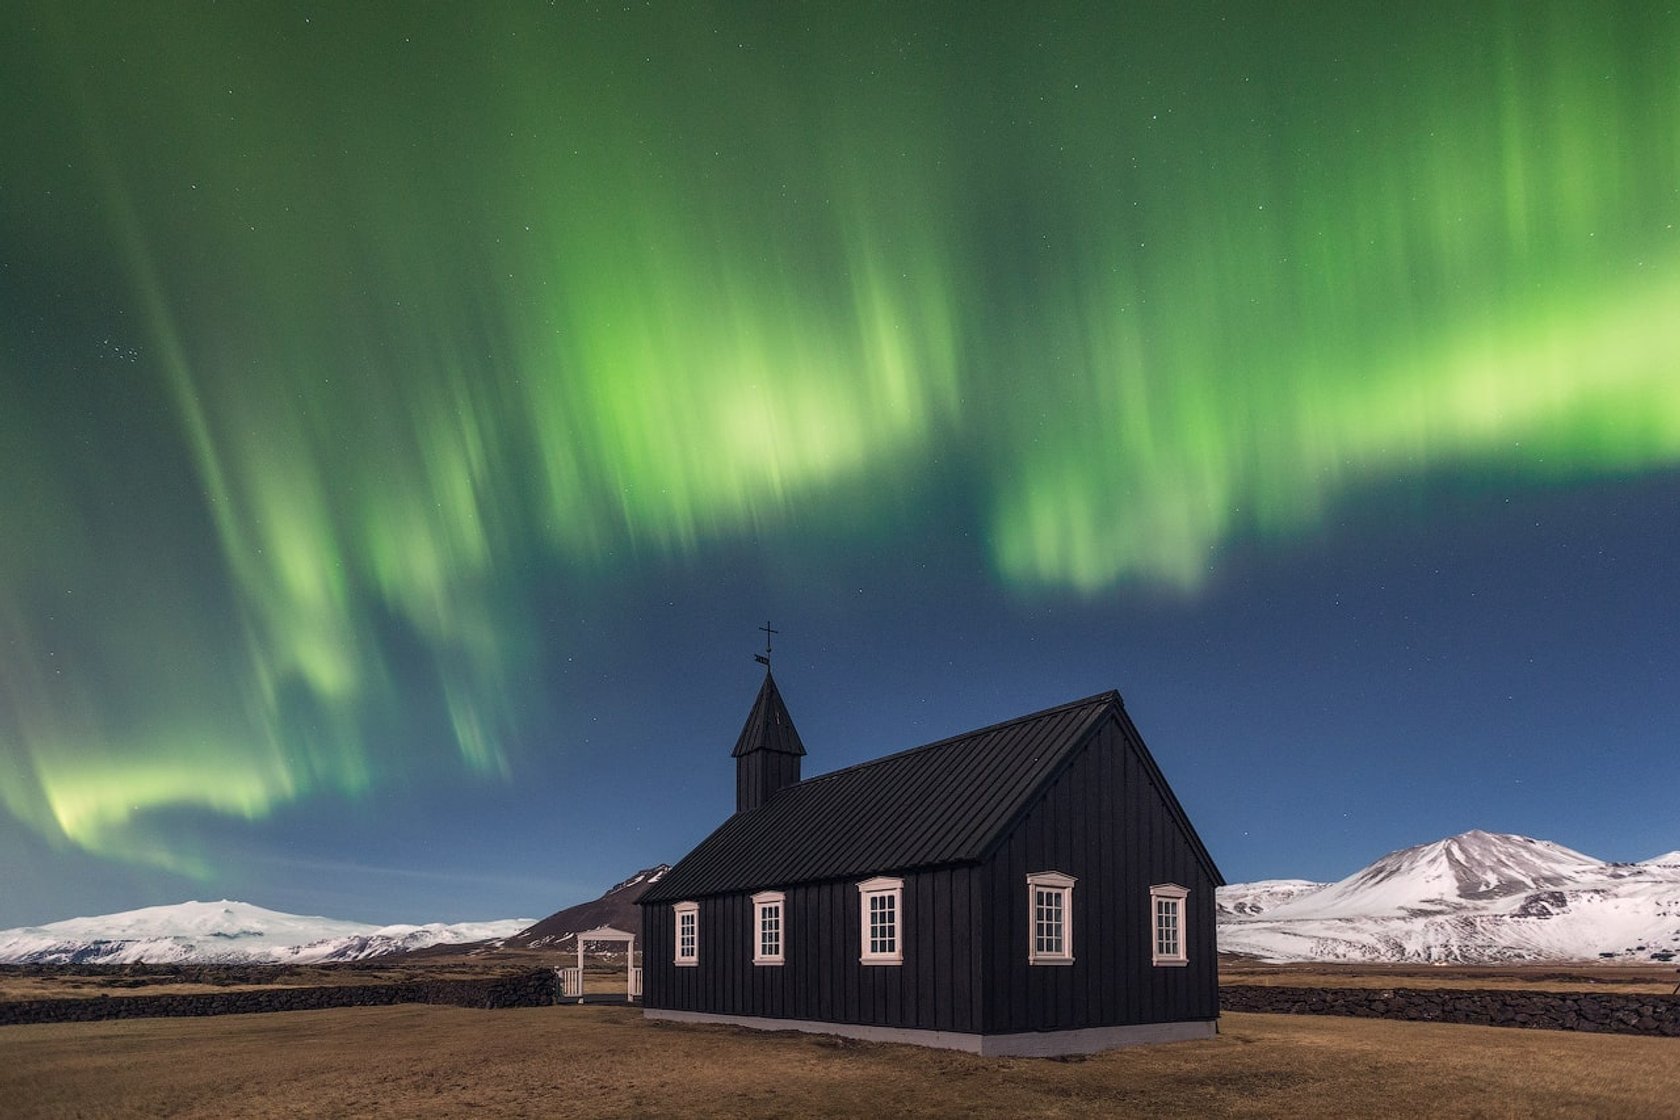 Traveling to Iceland can dramatically improve your photography skills and even unlock new life opportunities.(3)